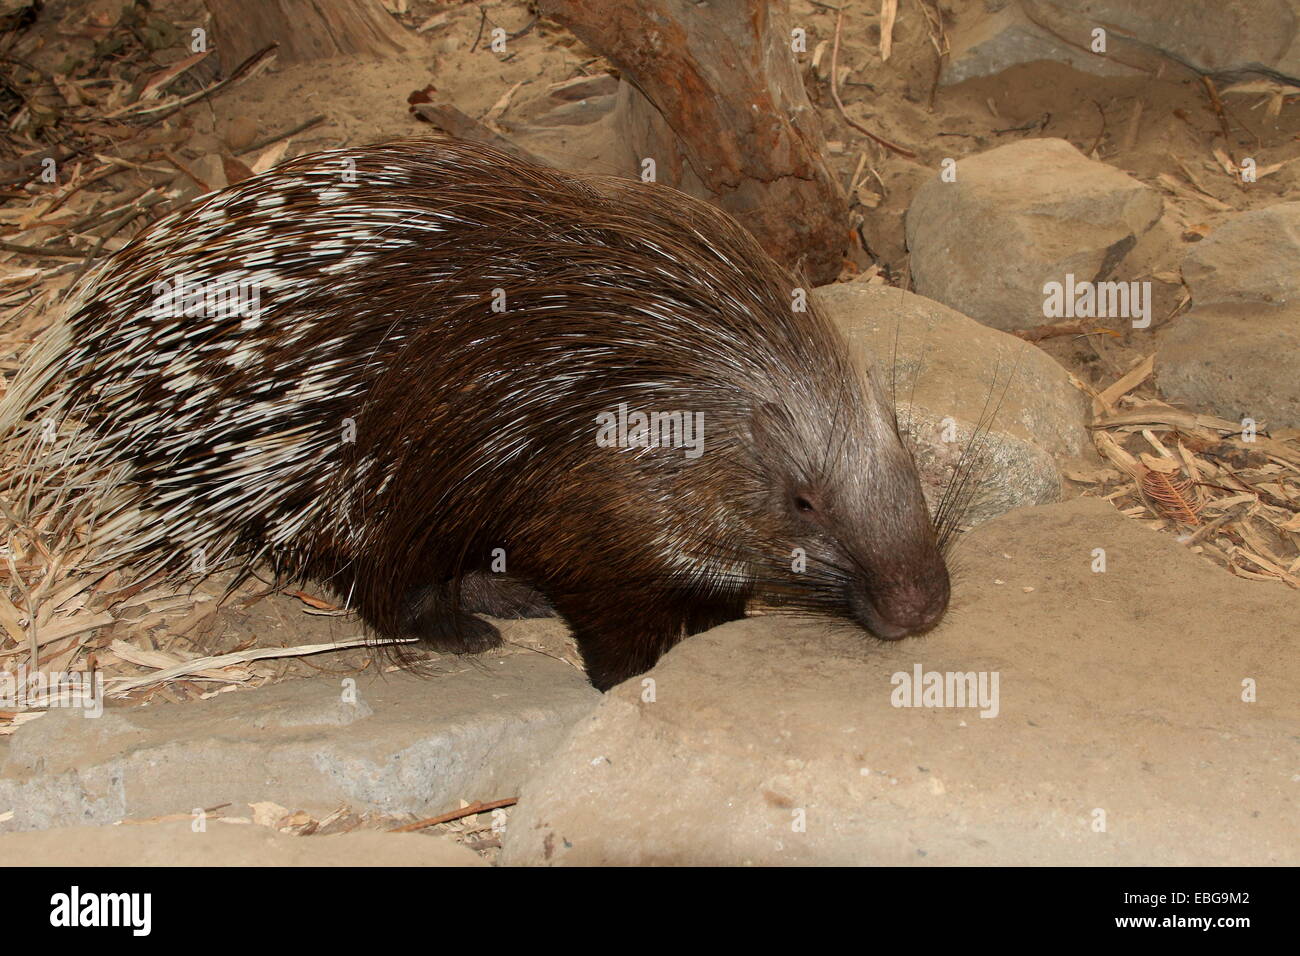 Indian crested porcupine (Hystrix indica) exploring Stock Photo